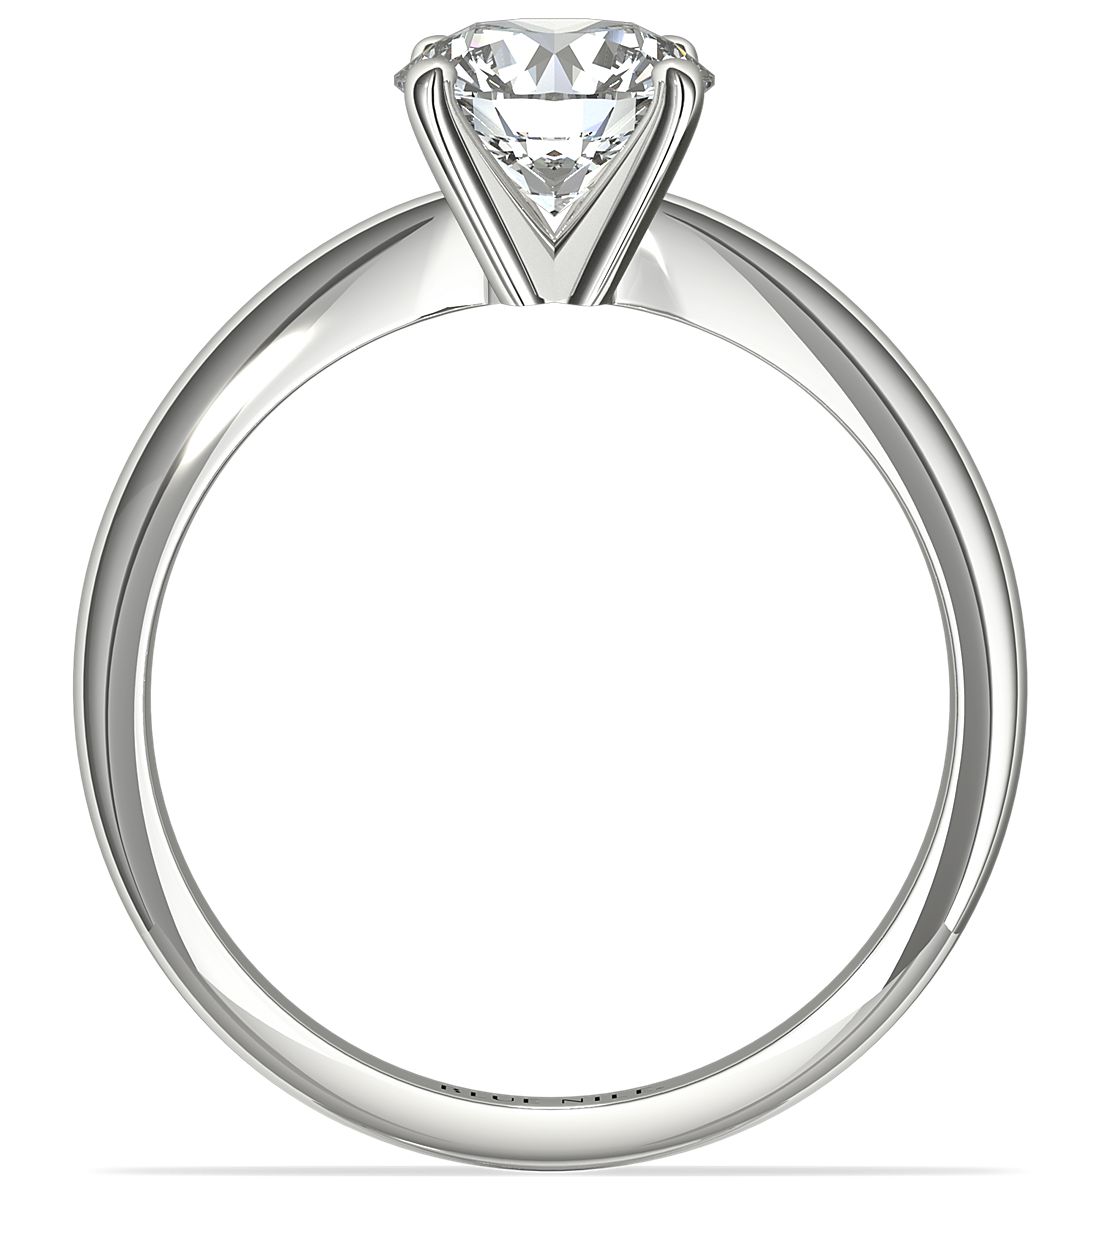 4-Prong Solitaire Engagement Ring Setting White Gold 14K